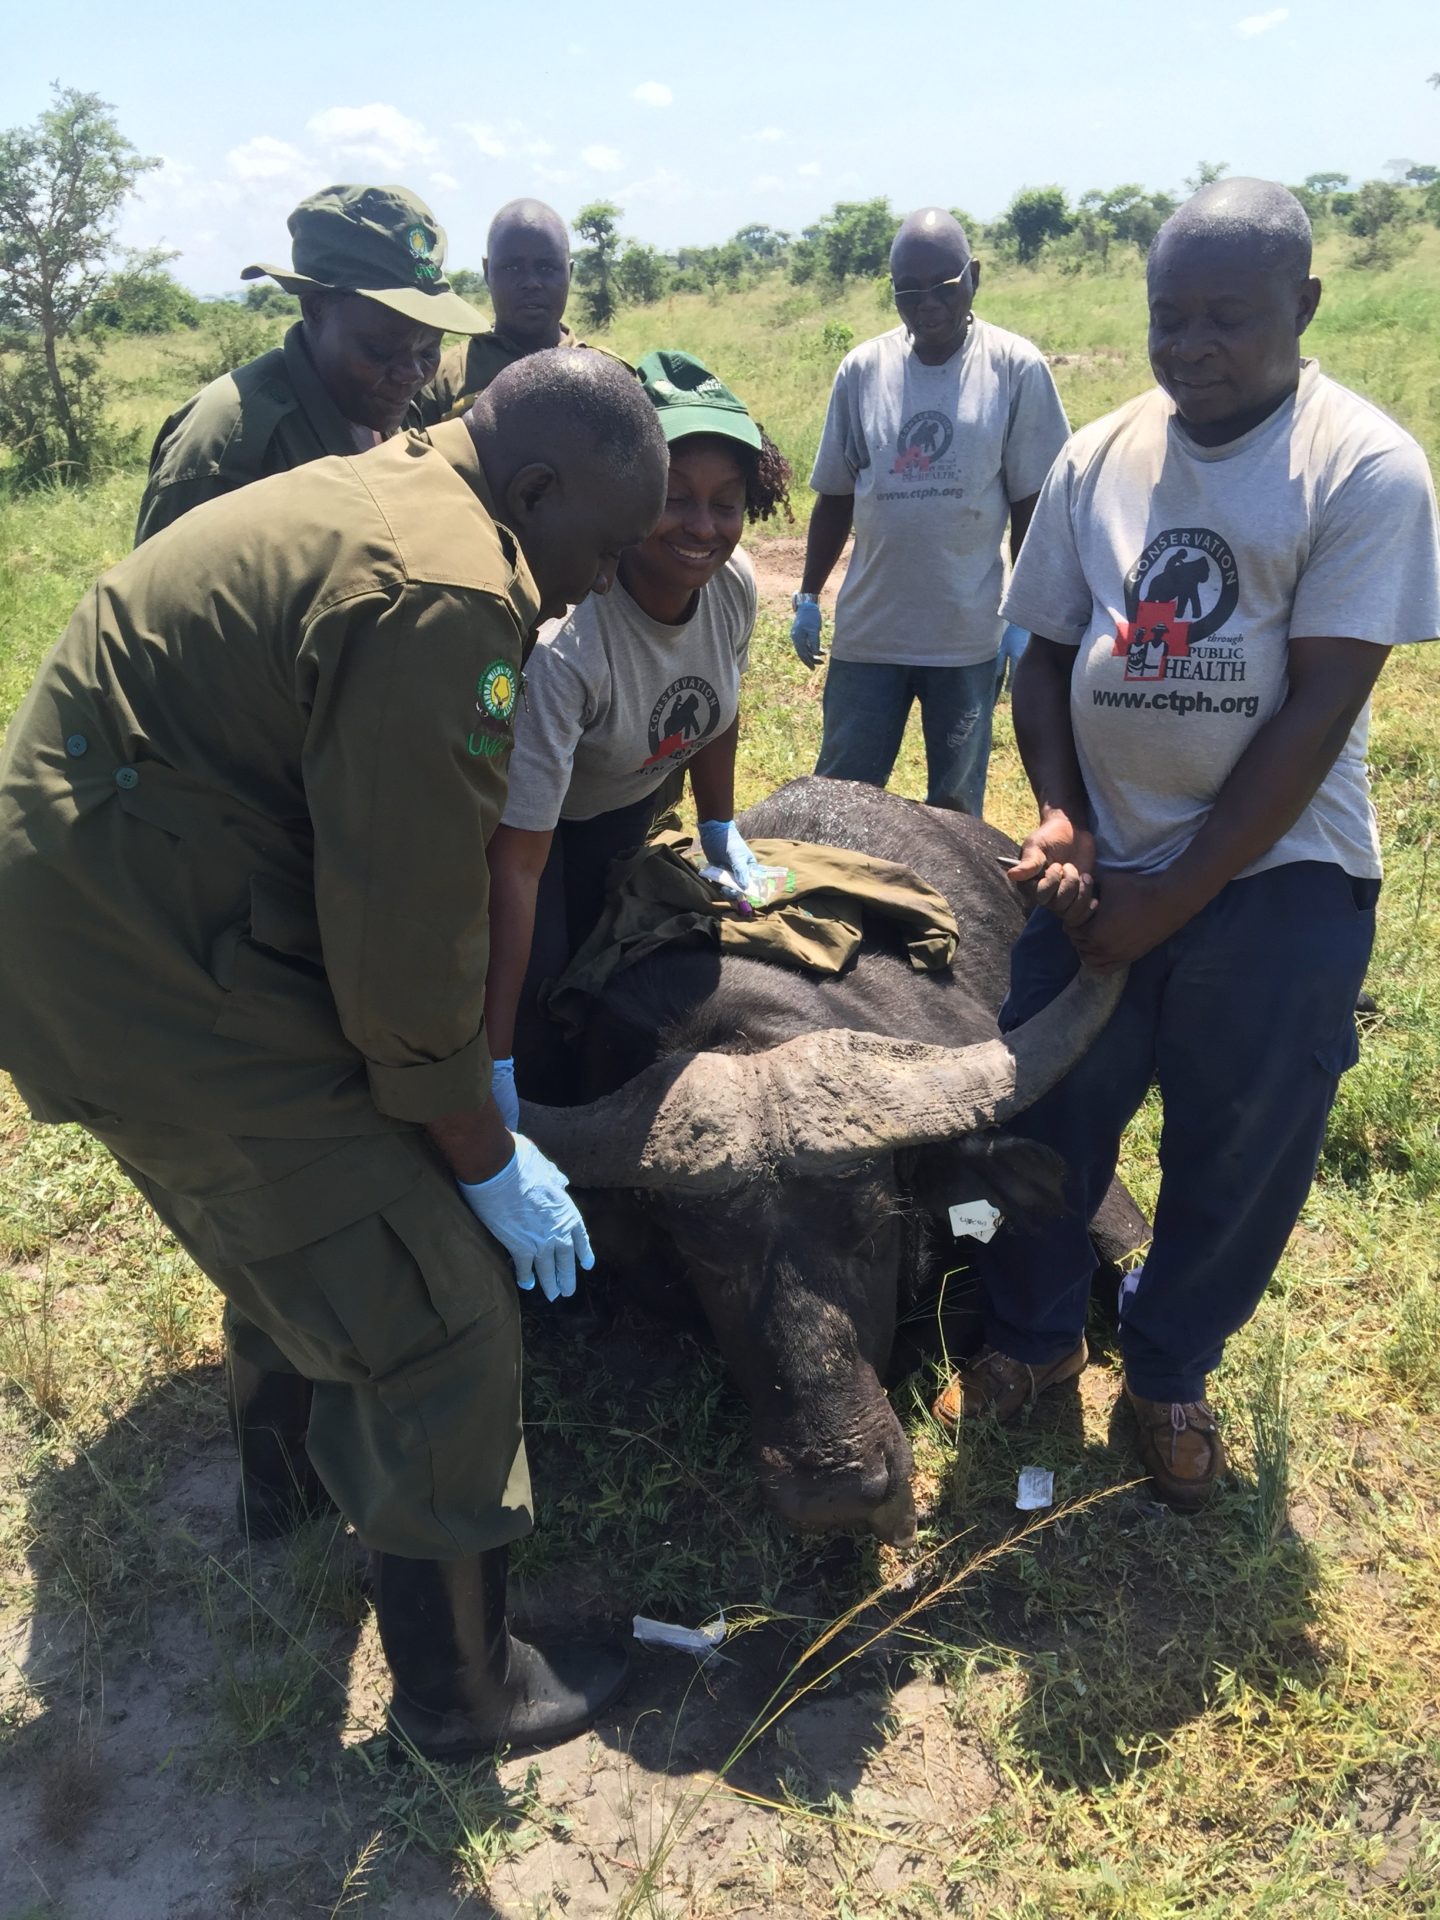 Dr. Gladys and the Uganda Wildlife Authority leading a team to conduct buffalo disease surveys at Queen Elizabeth National Park